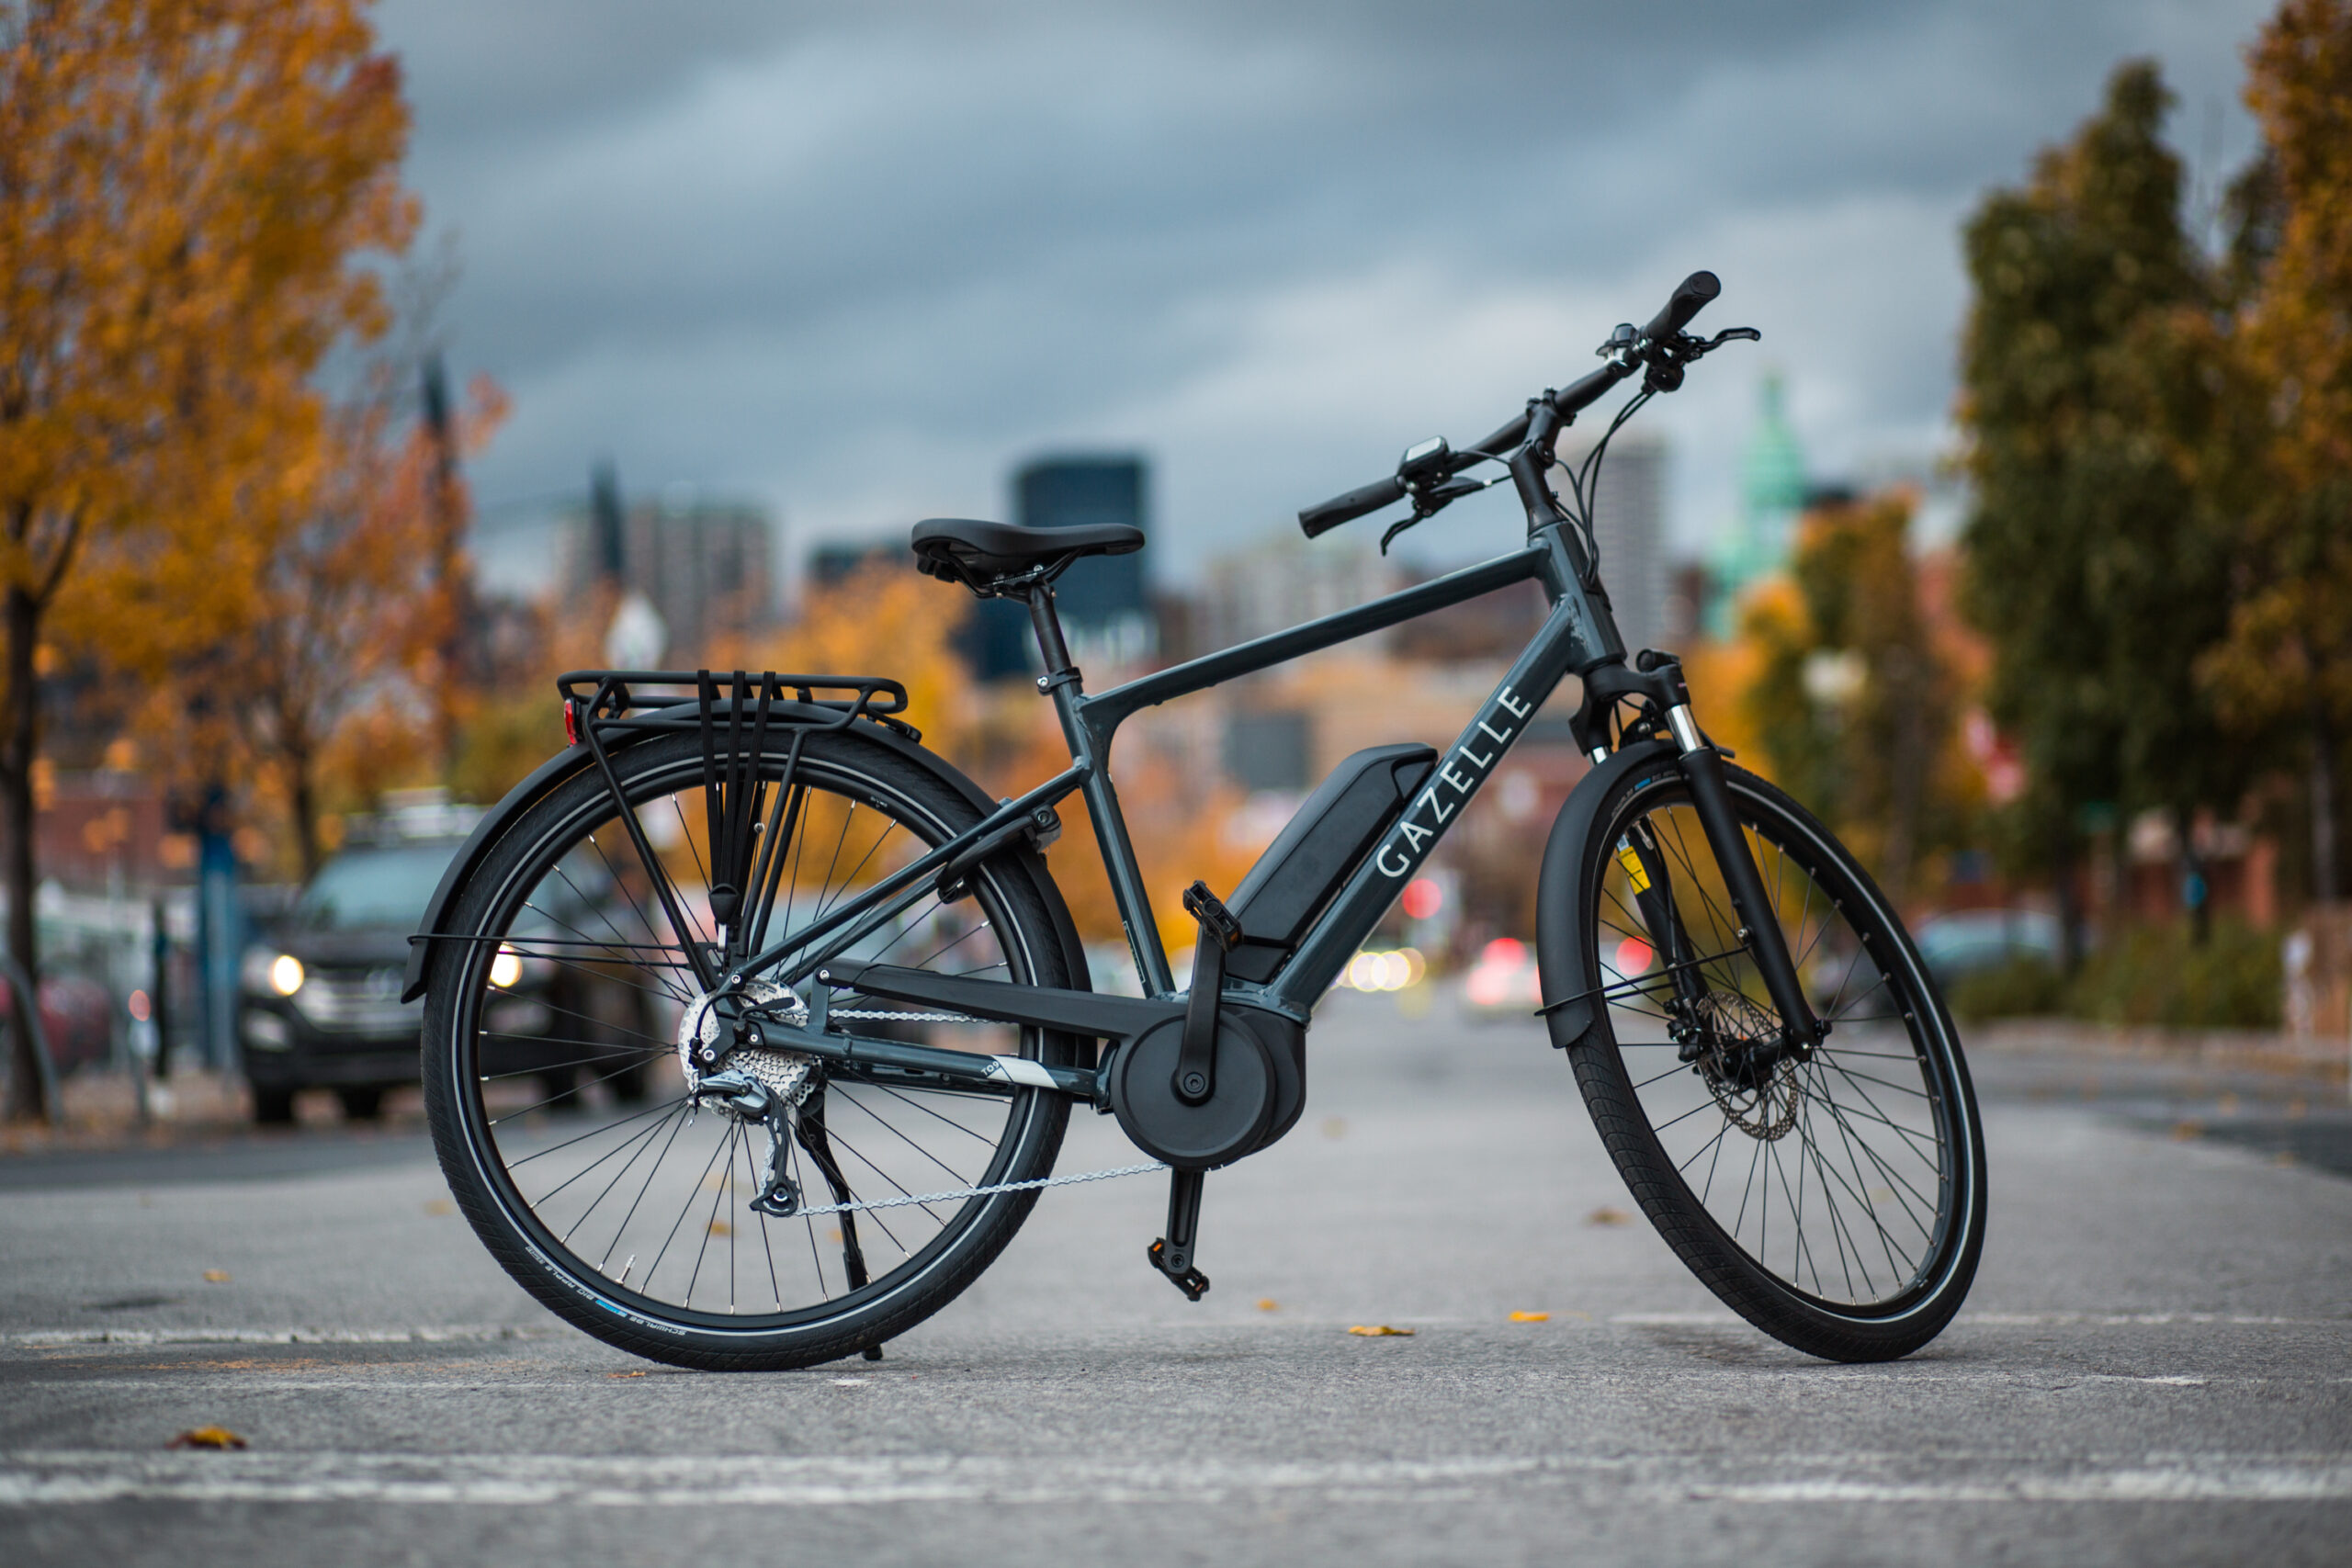 Black color Gazelle Medeo T9 electric bike standing on the road